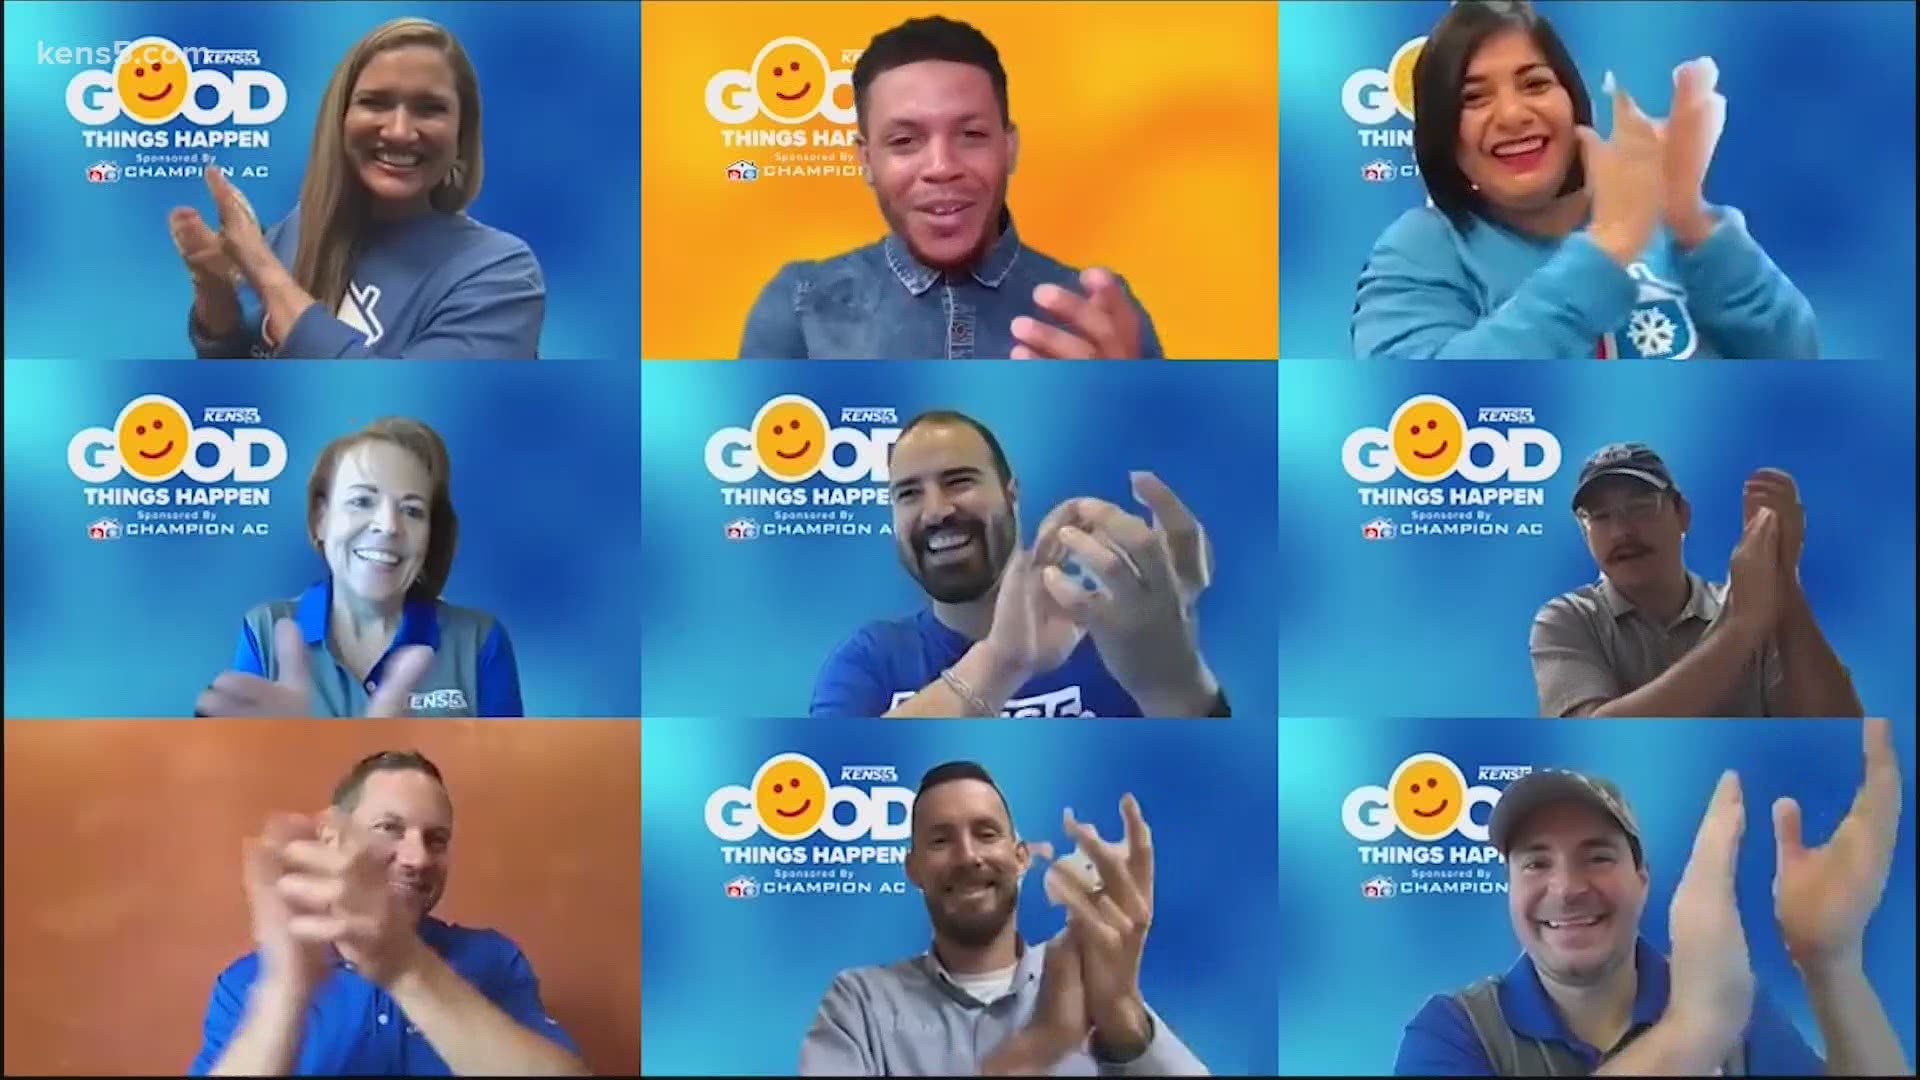 KENS 5 teamed up with Champions AC to give some viewers a reason to smile about.